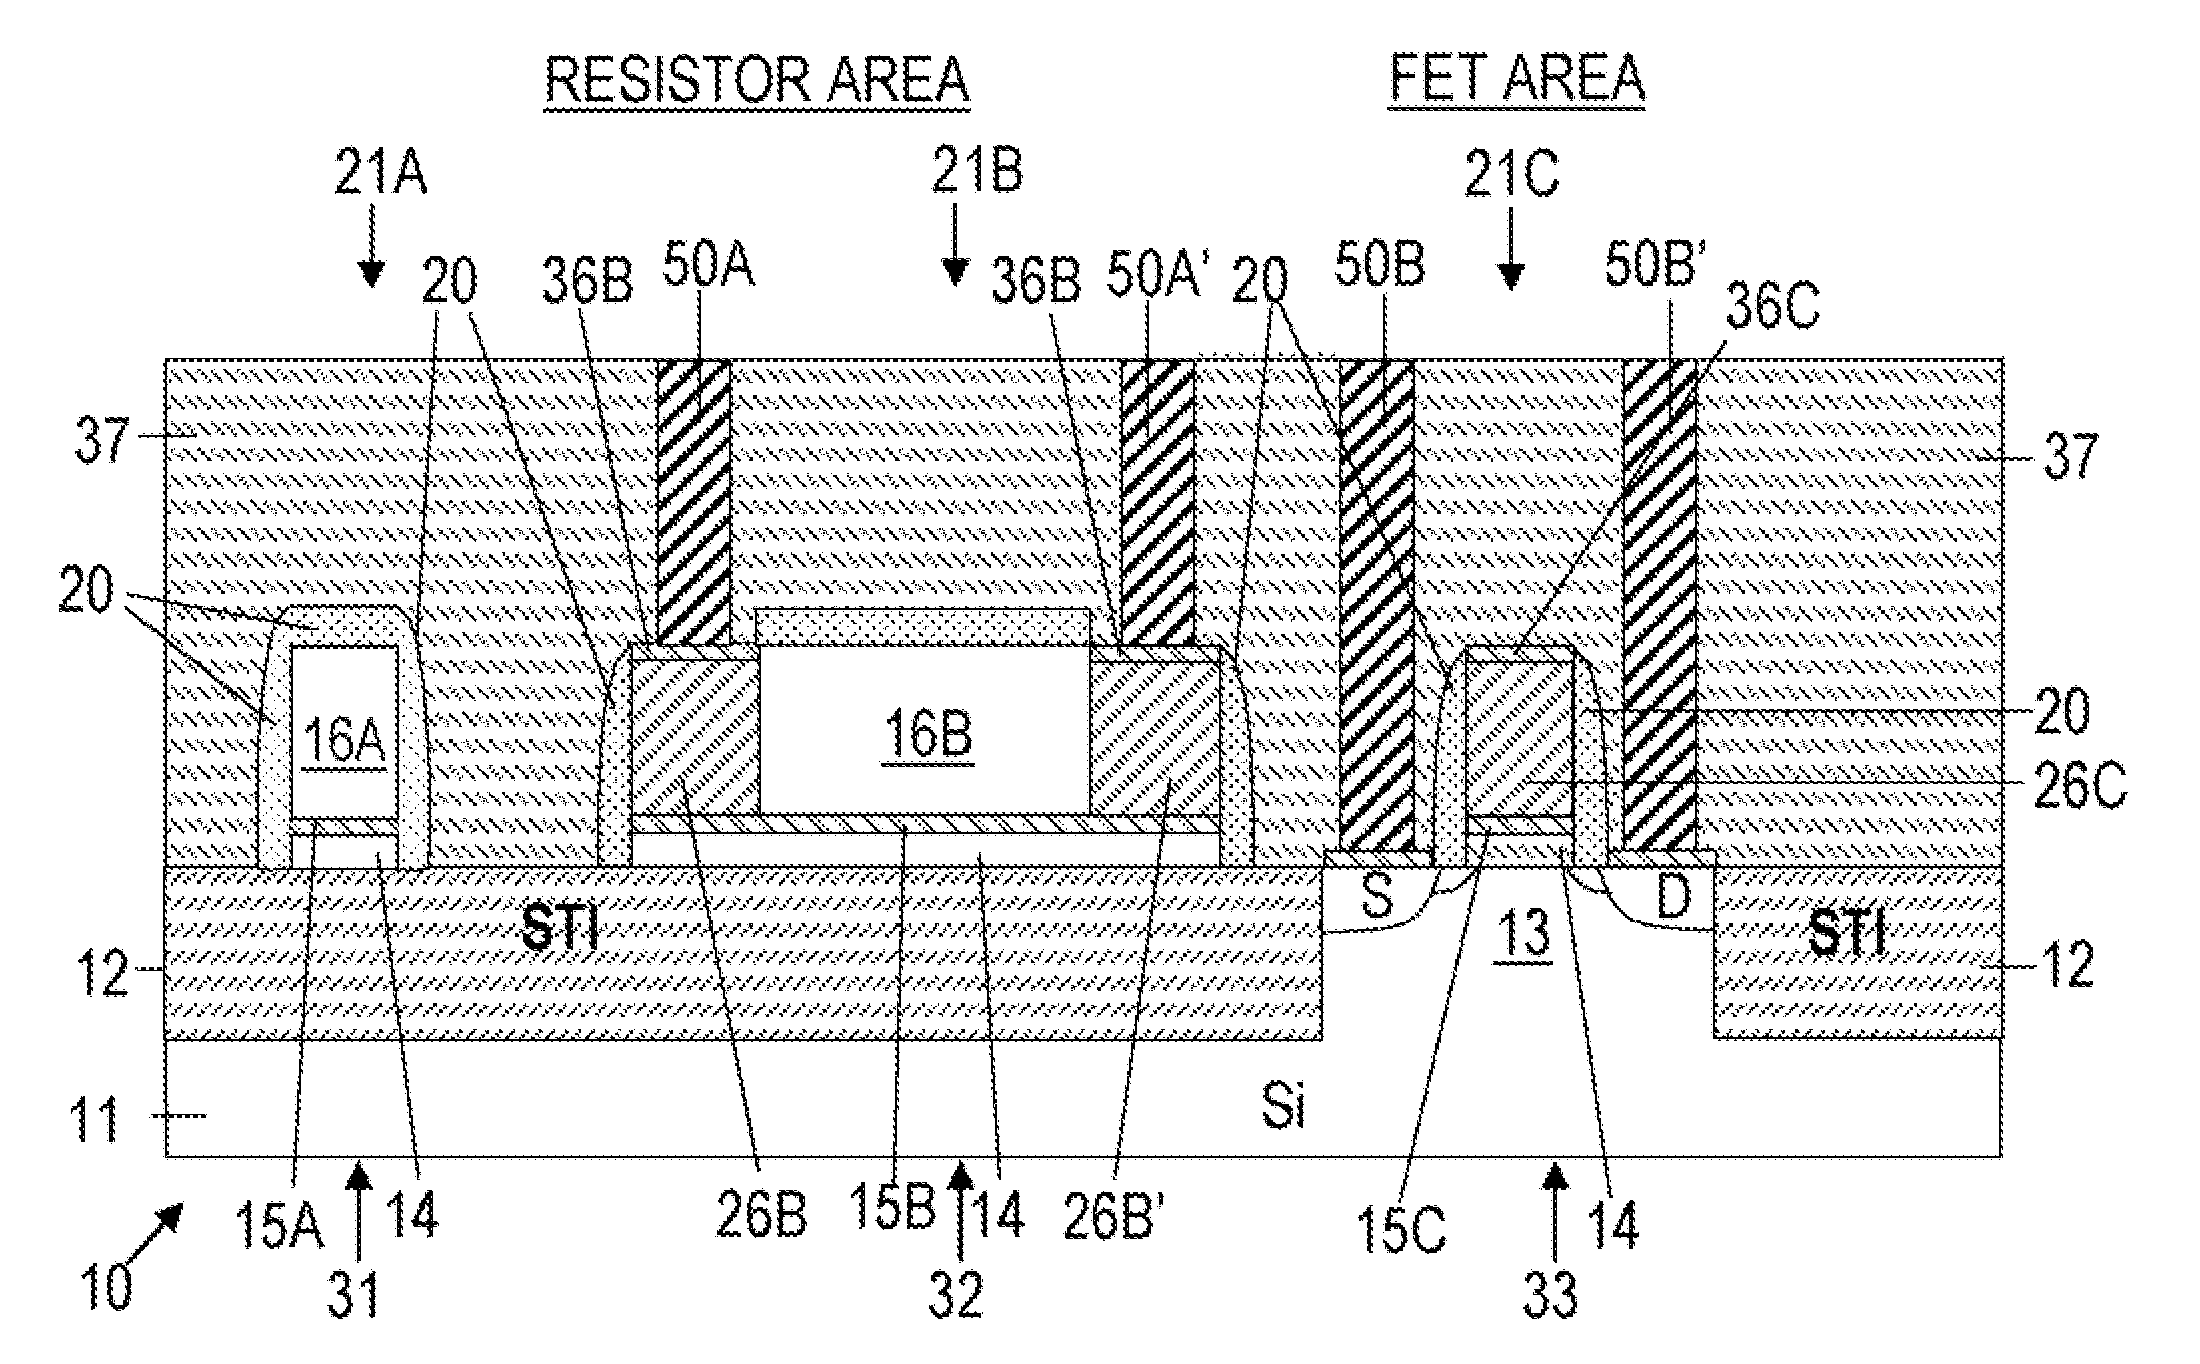 Resistor and fet formed from the metal portion of a mosfet metal gate stack